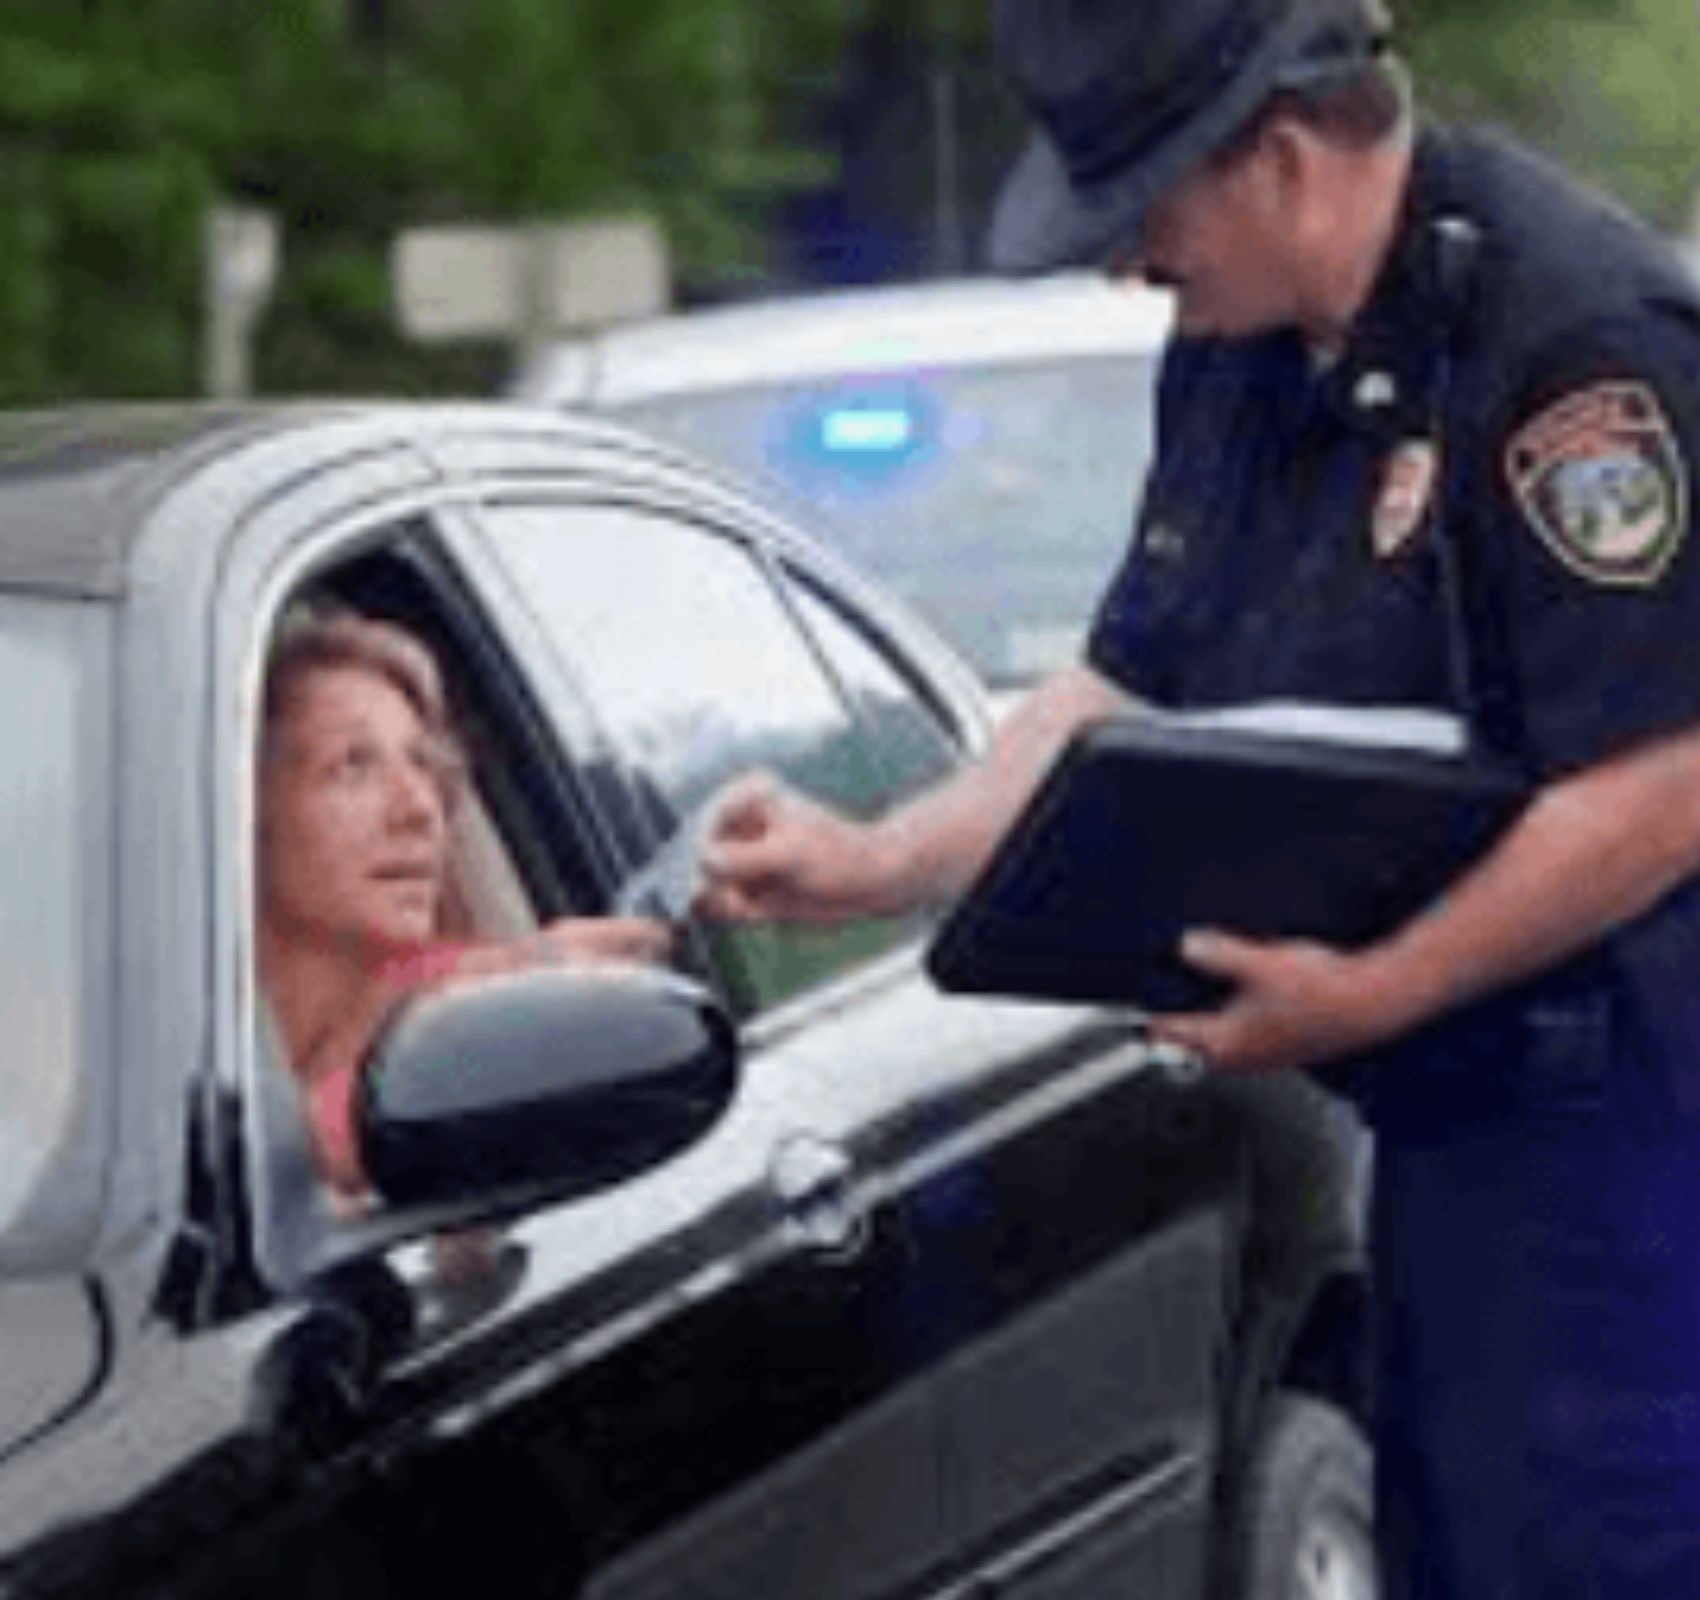 How to get a Ticket Dismissed for wrong information